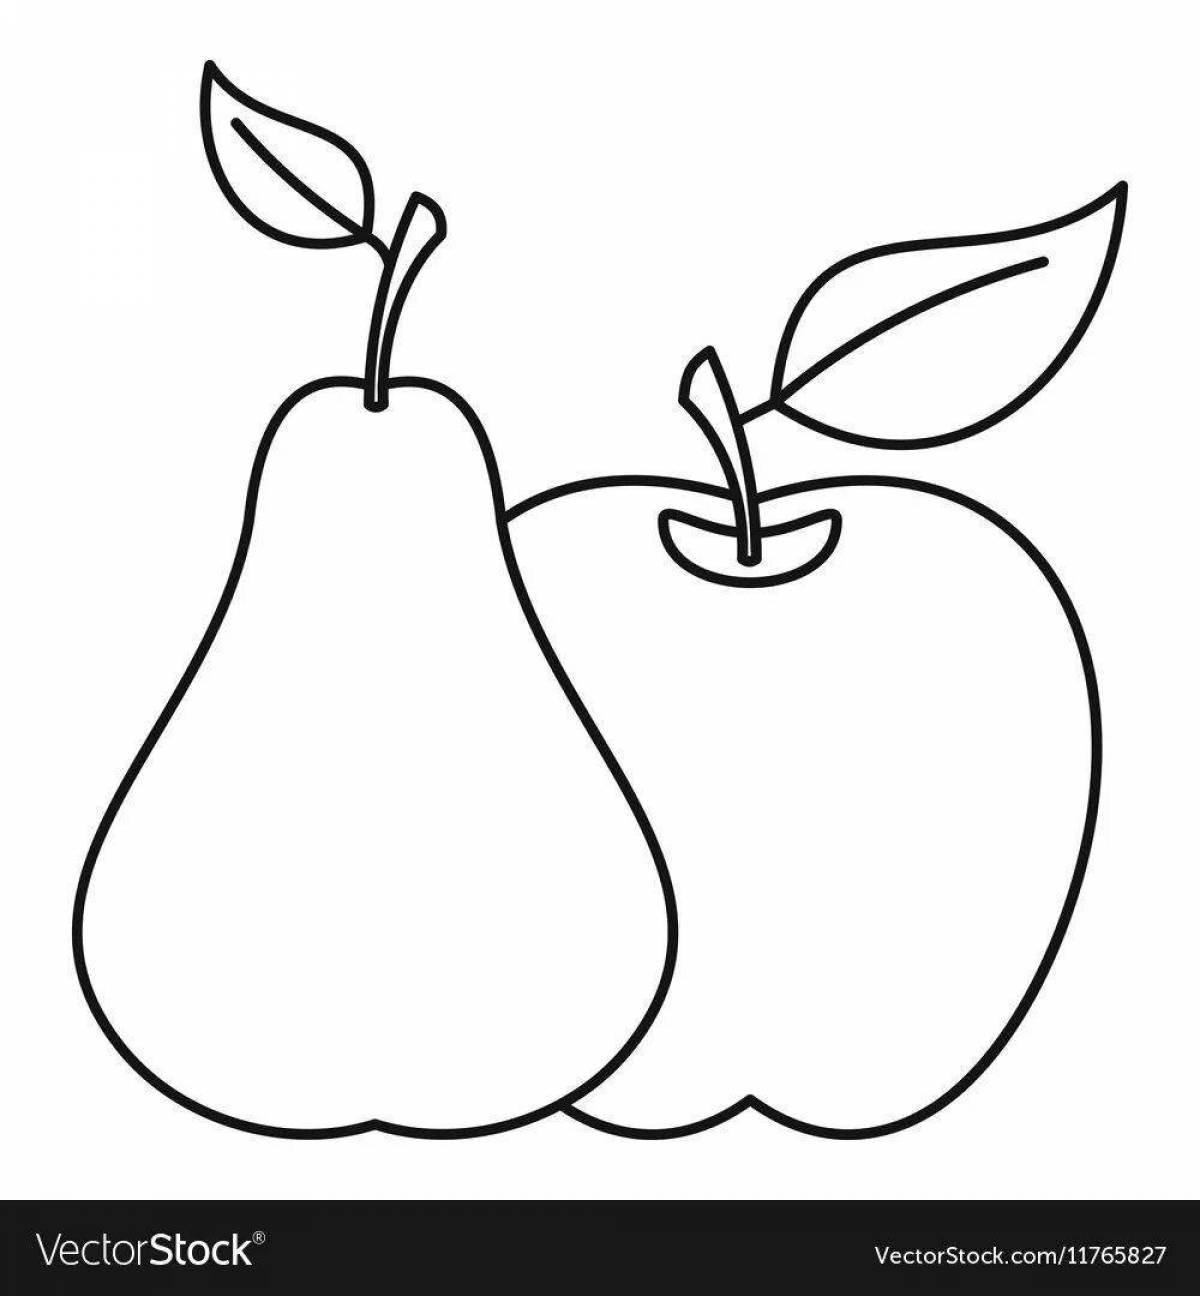 Colorful apple pear coloring page